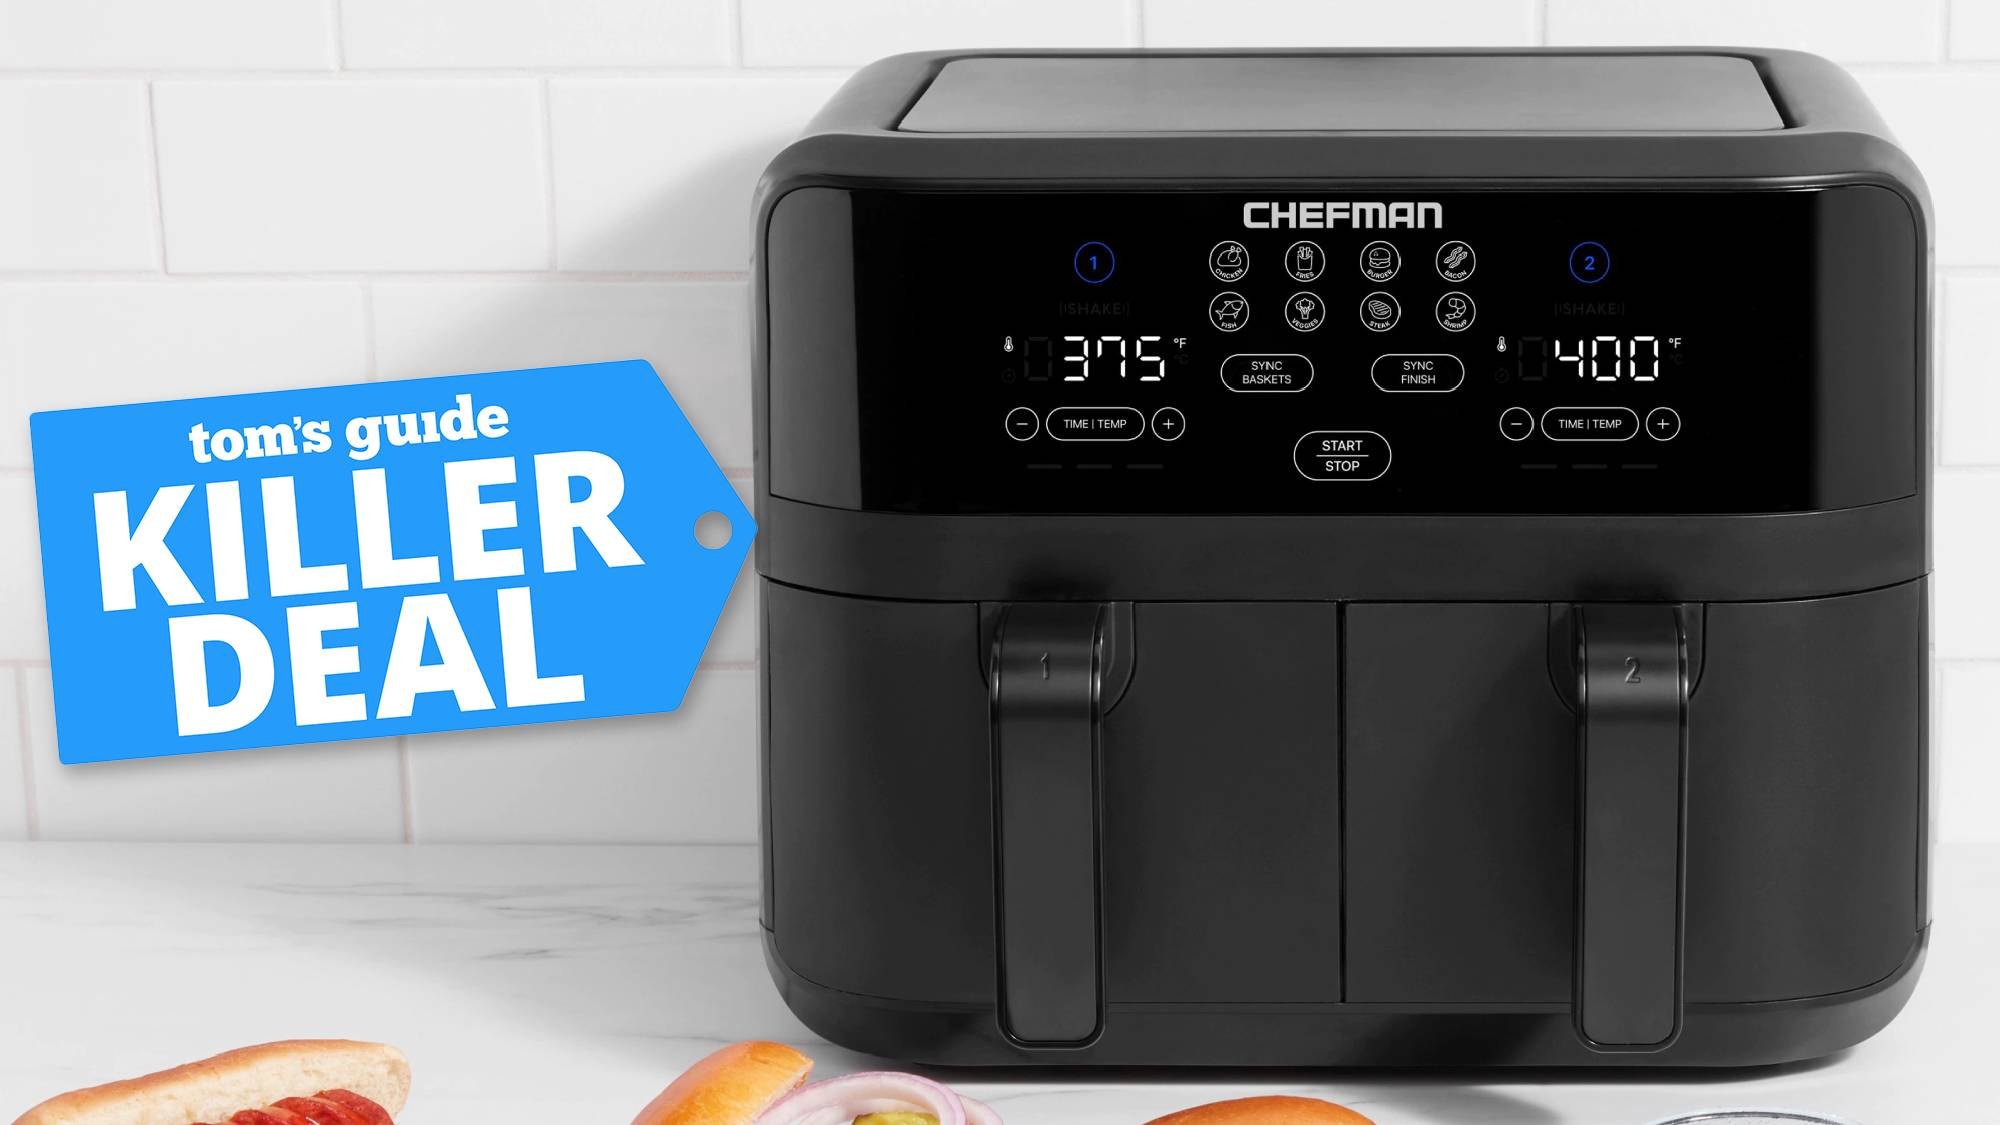 Chefman TurboFry Air Fryer with a Tom's Guide deal tag